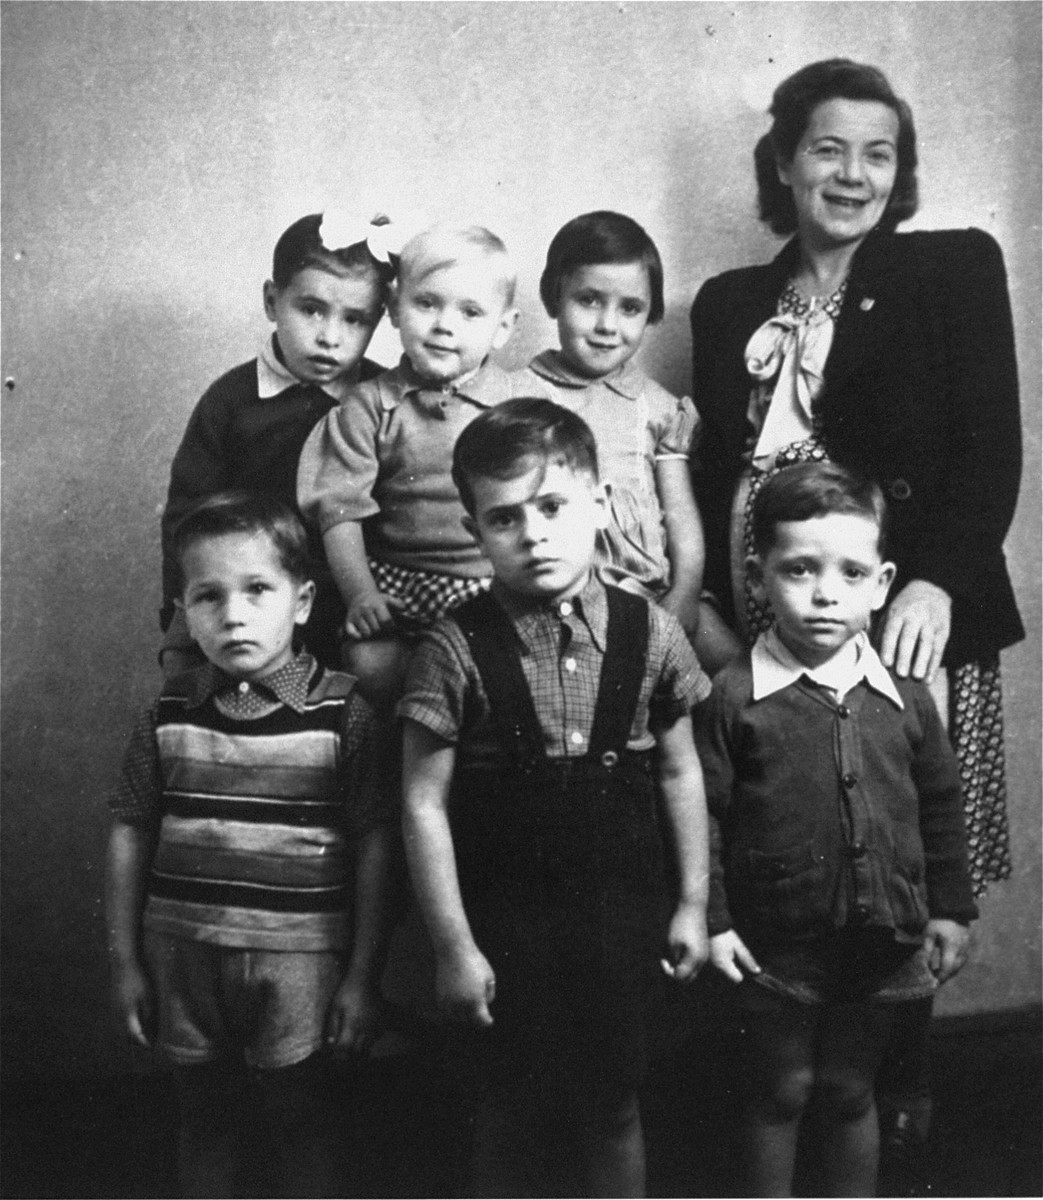 Bina Halperin poses with a group of six Jewish orphans at a children's home in Austria run by the American Joint Distribution Committee. These children were part of a larger group of twenty to thirty orphans who were removed by Bina Halperin from a convent in Poland were they had been hidden during the war.